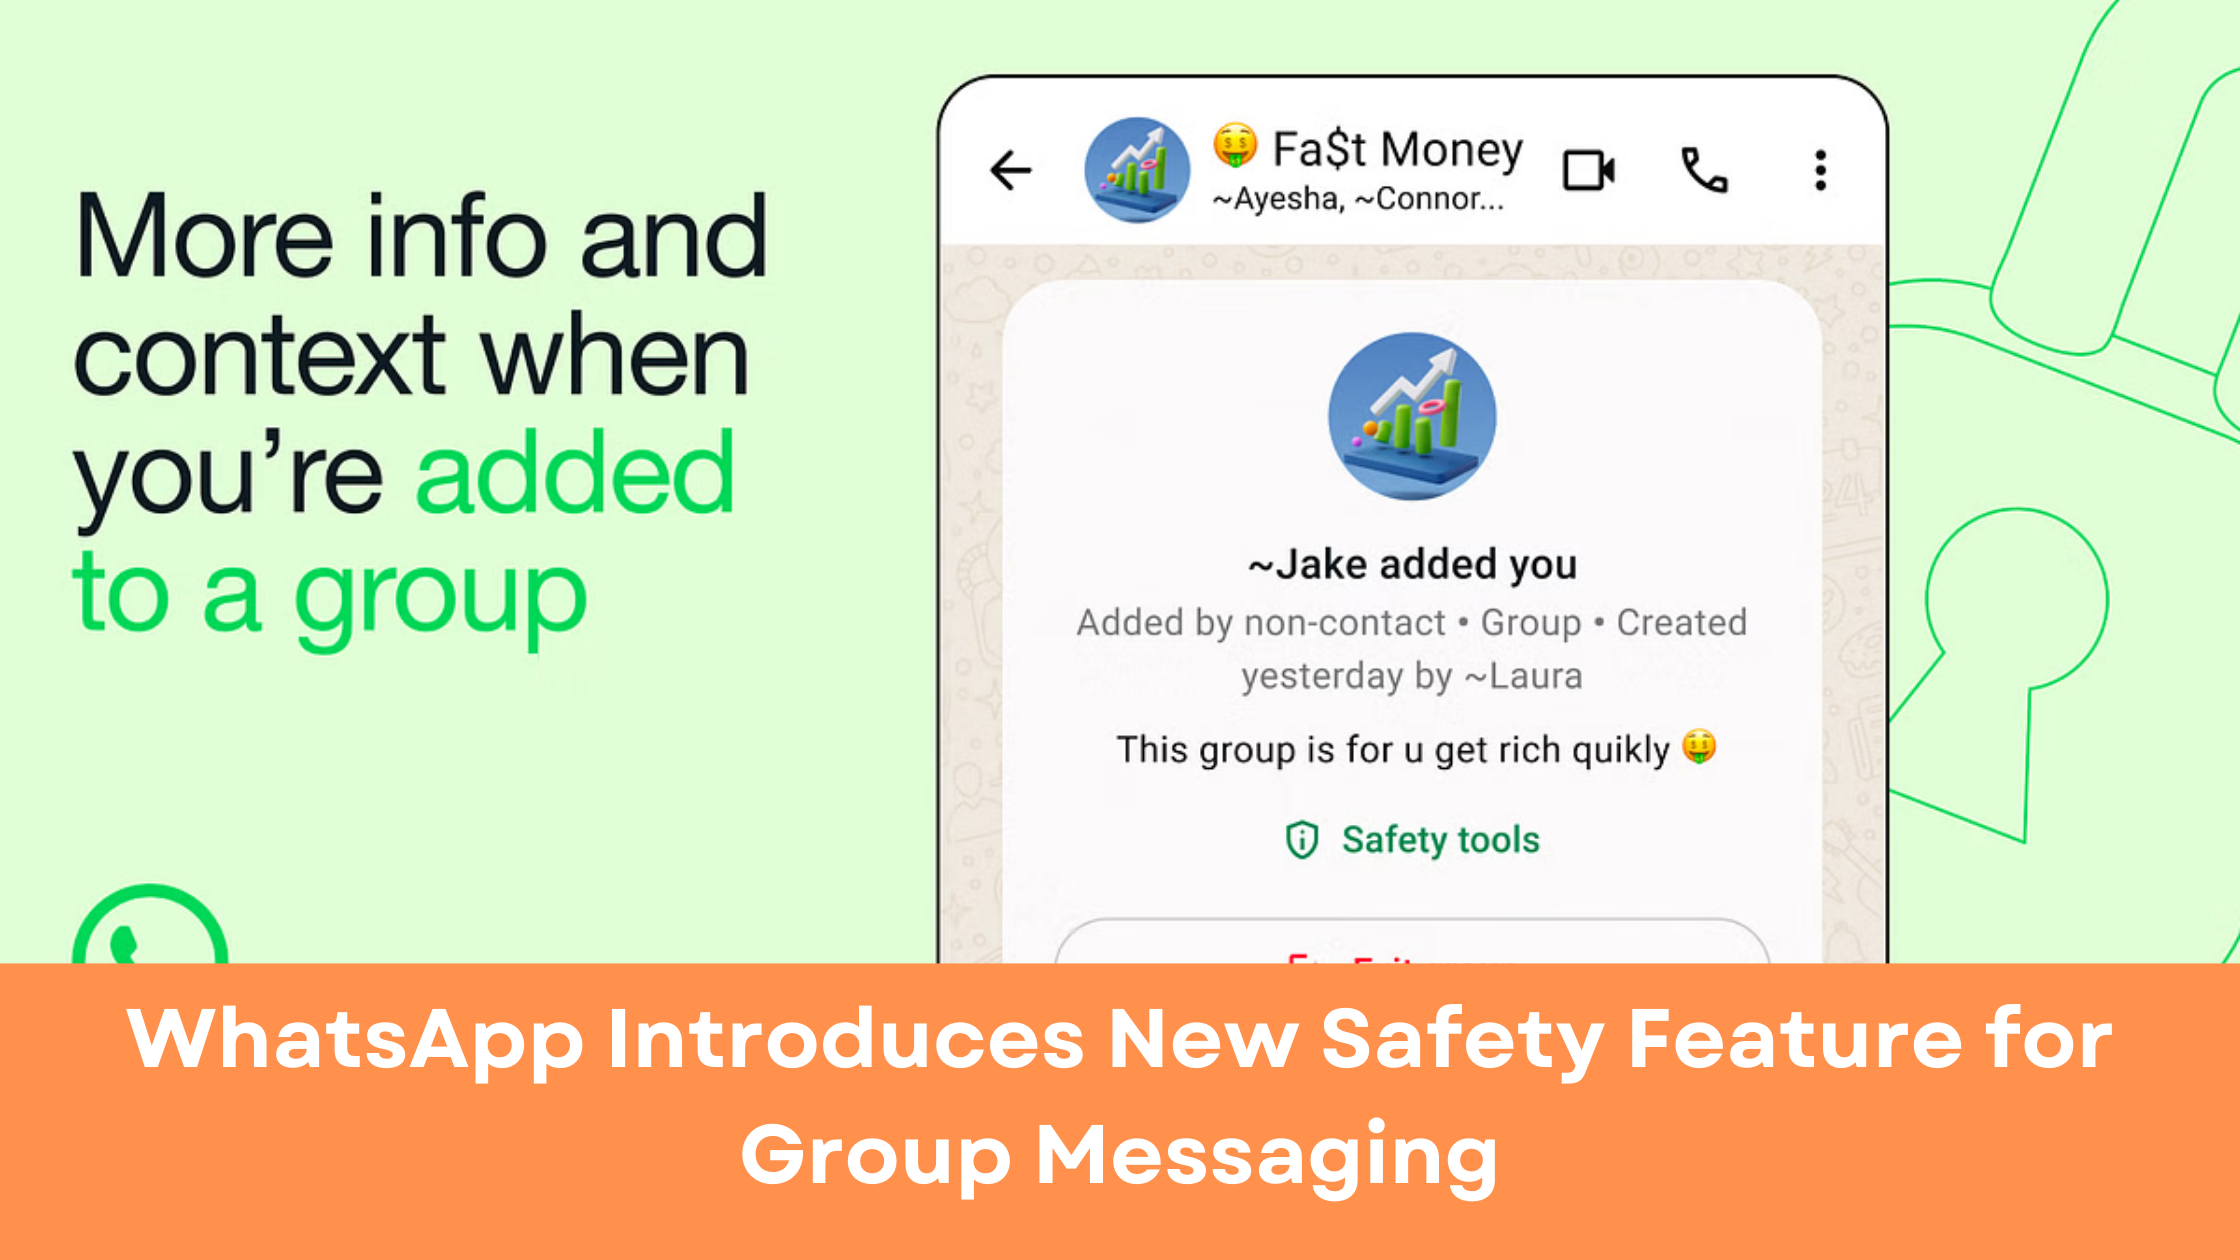 WhatsApp Introduces New Safety Feature for Group Messaging: How to Change Group Privacy Settings